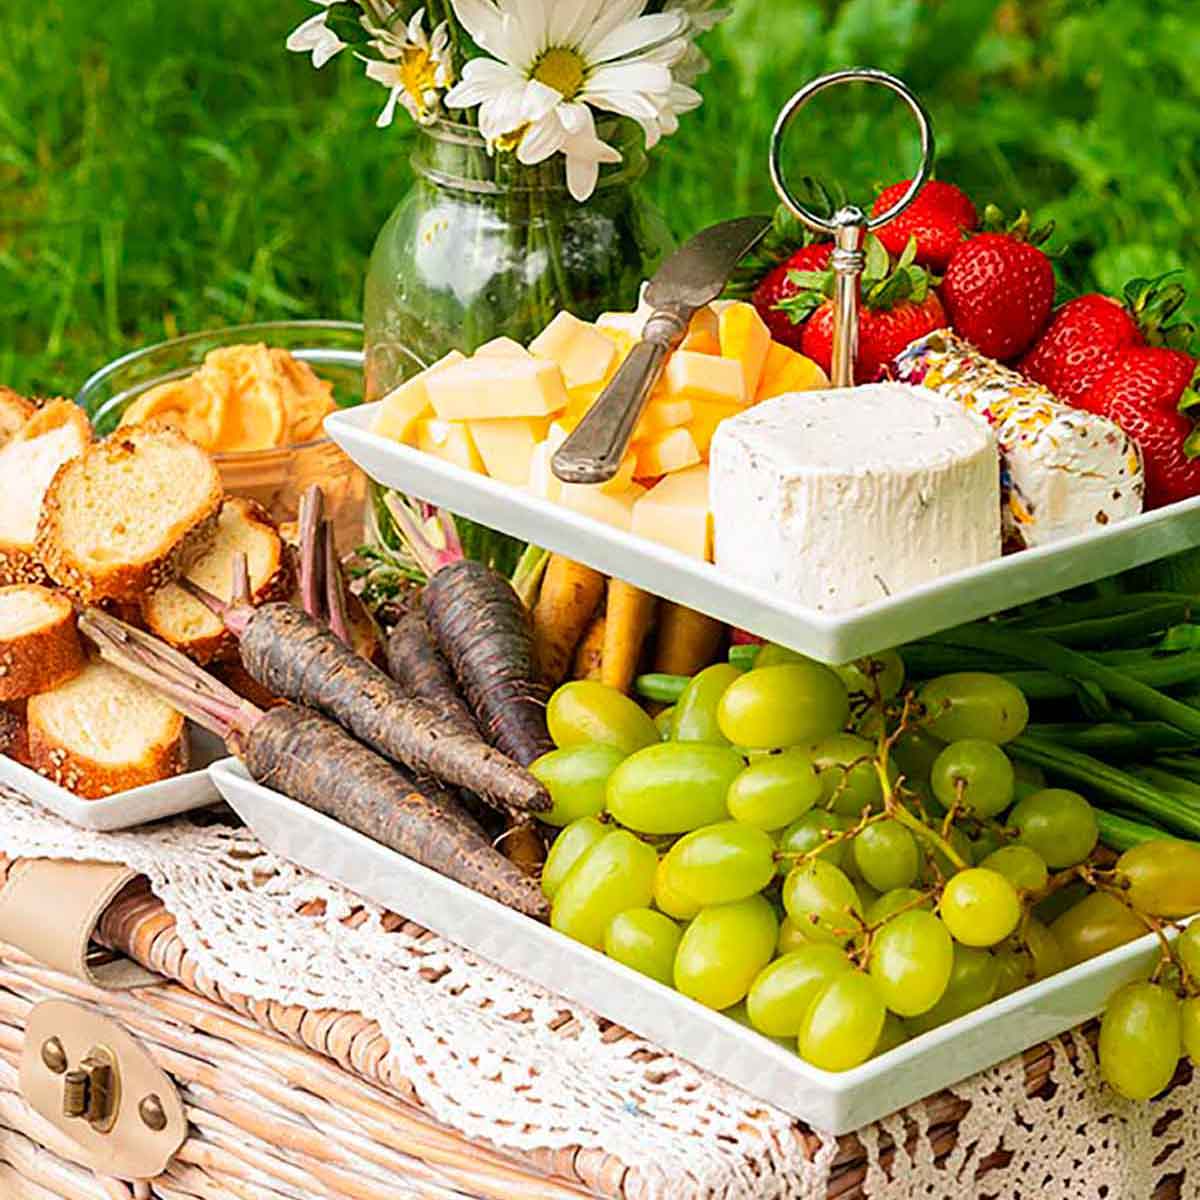 A 2 tiered plate with fruits, vegetables, cheese and bread, placed on a picnic basket, beside a jar of daisies on grass.